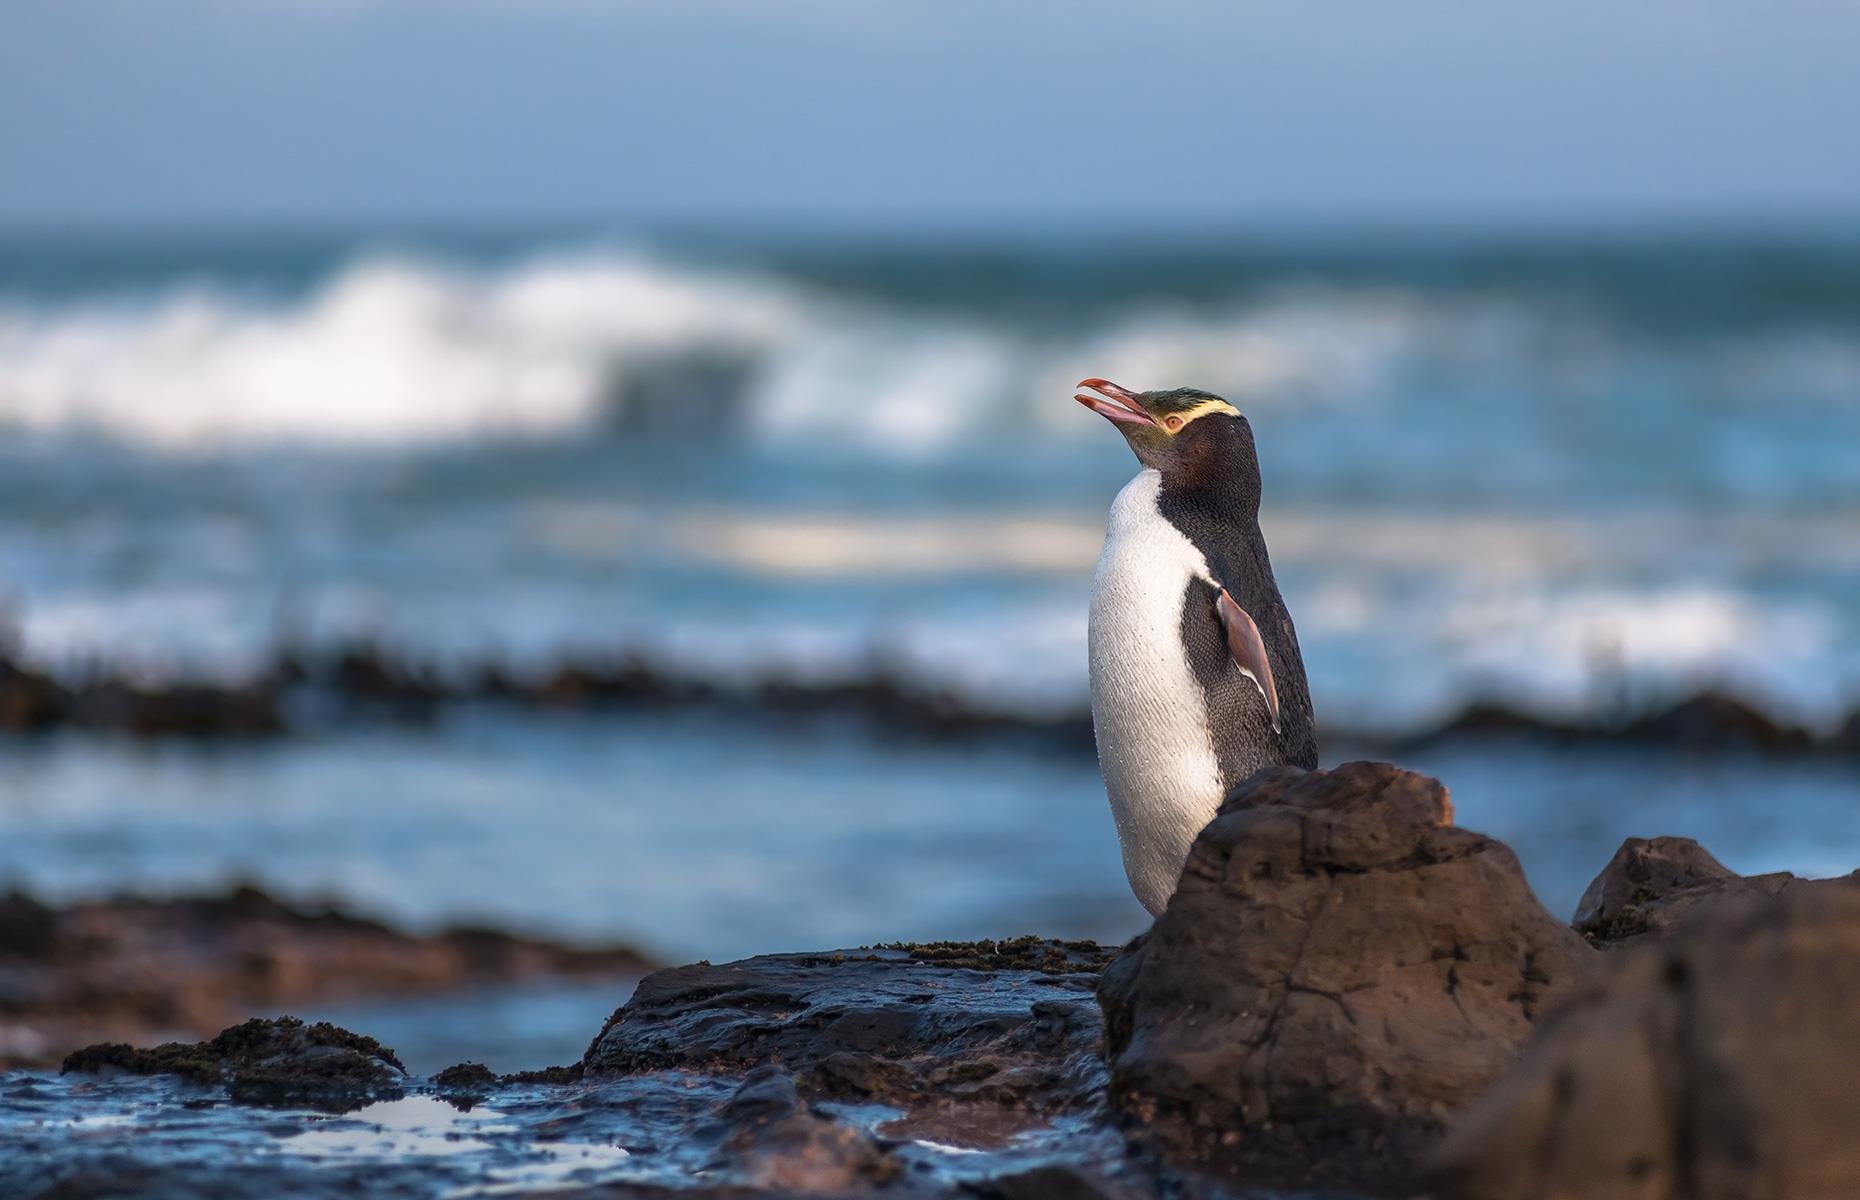 <p>The world’s rarest species of penguin, the yellow-eyed penguin (Megadyptes antipodes), or hoiho, can be spotted at Curio Bay in The Catlins. The southeast corner of the South Island is home to these protected birds and it’s estimated there are only around 6,000 to 7,000 of them left in the wild in New Zealand.</p>